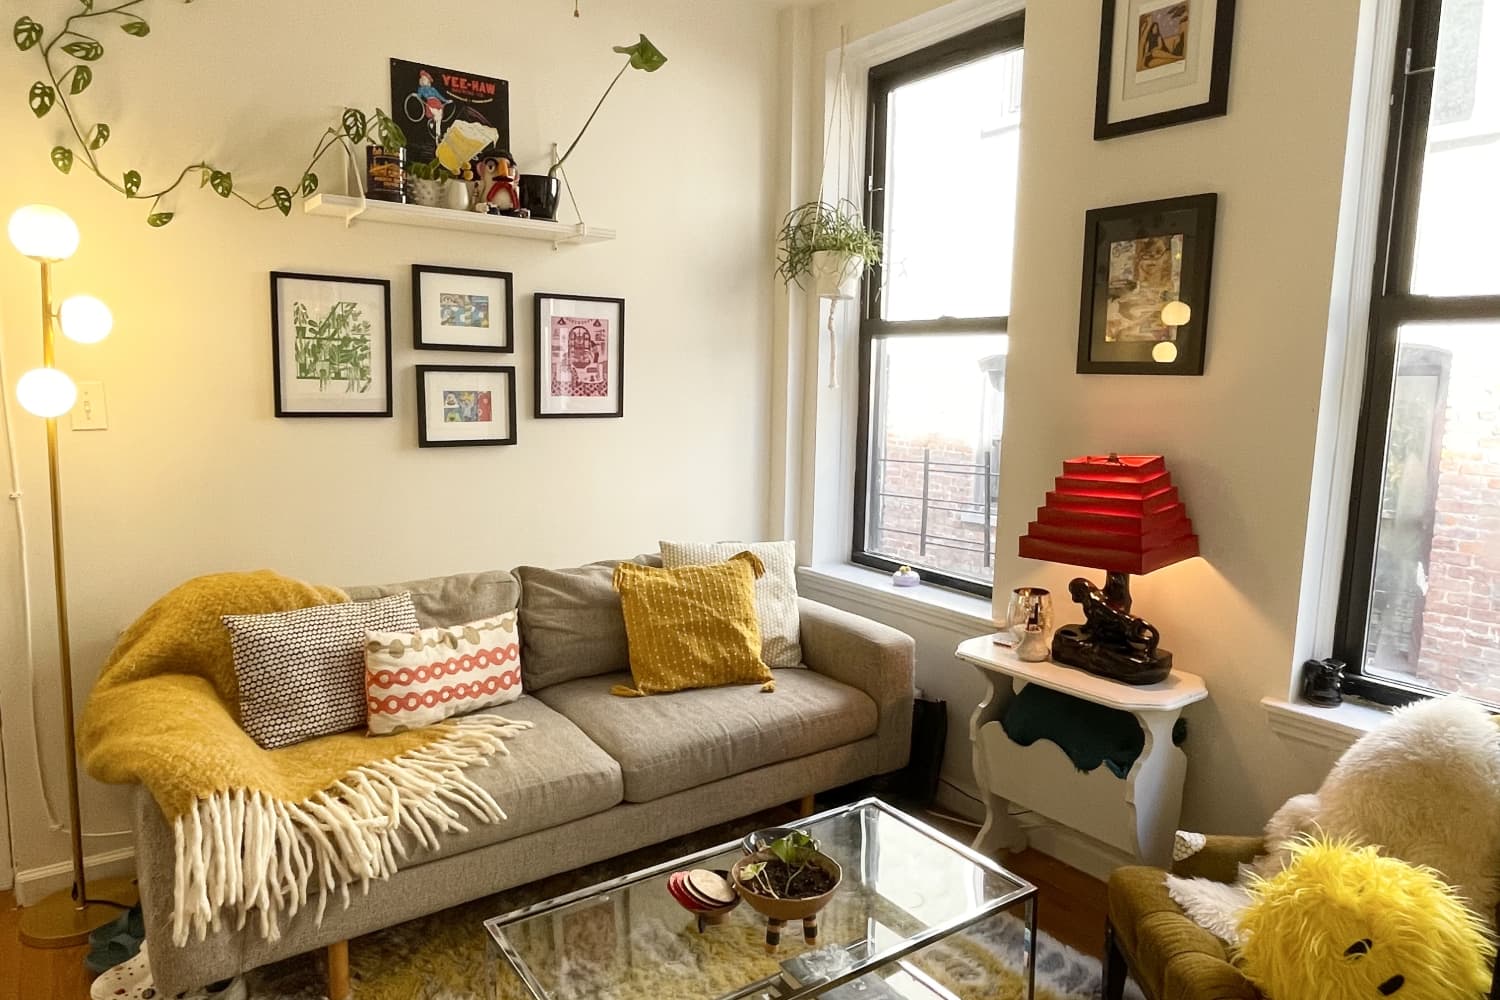 550-Square-Foot Brooklyn Rental Apartment Photos | Apartment Therapy